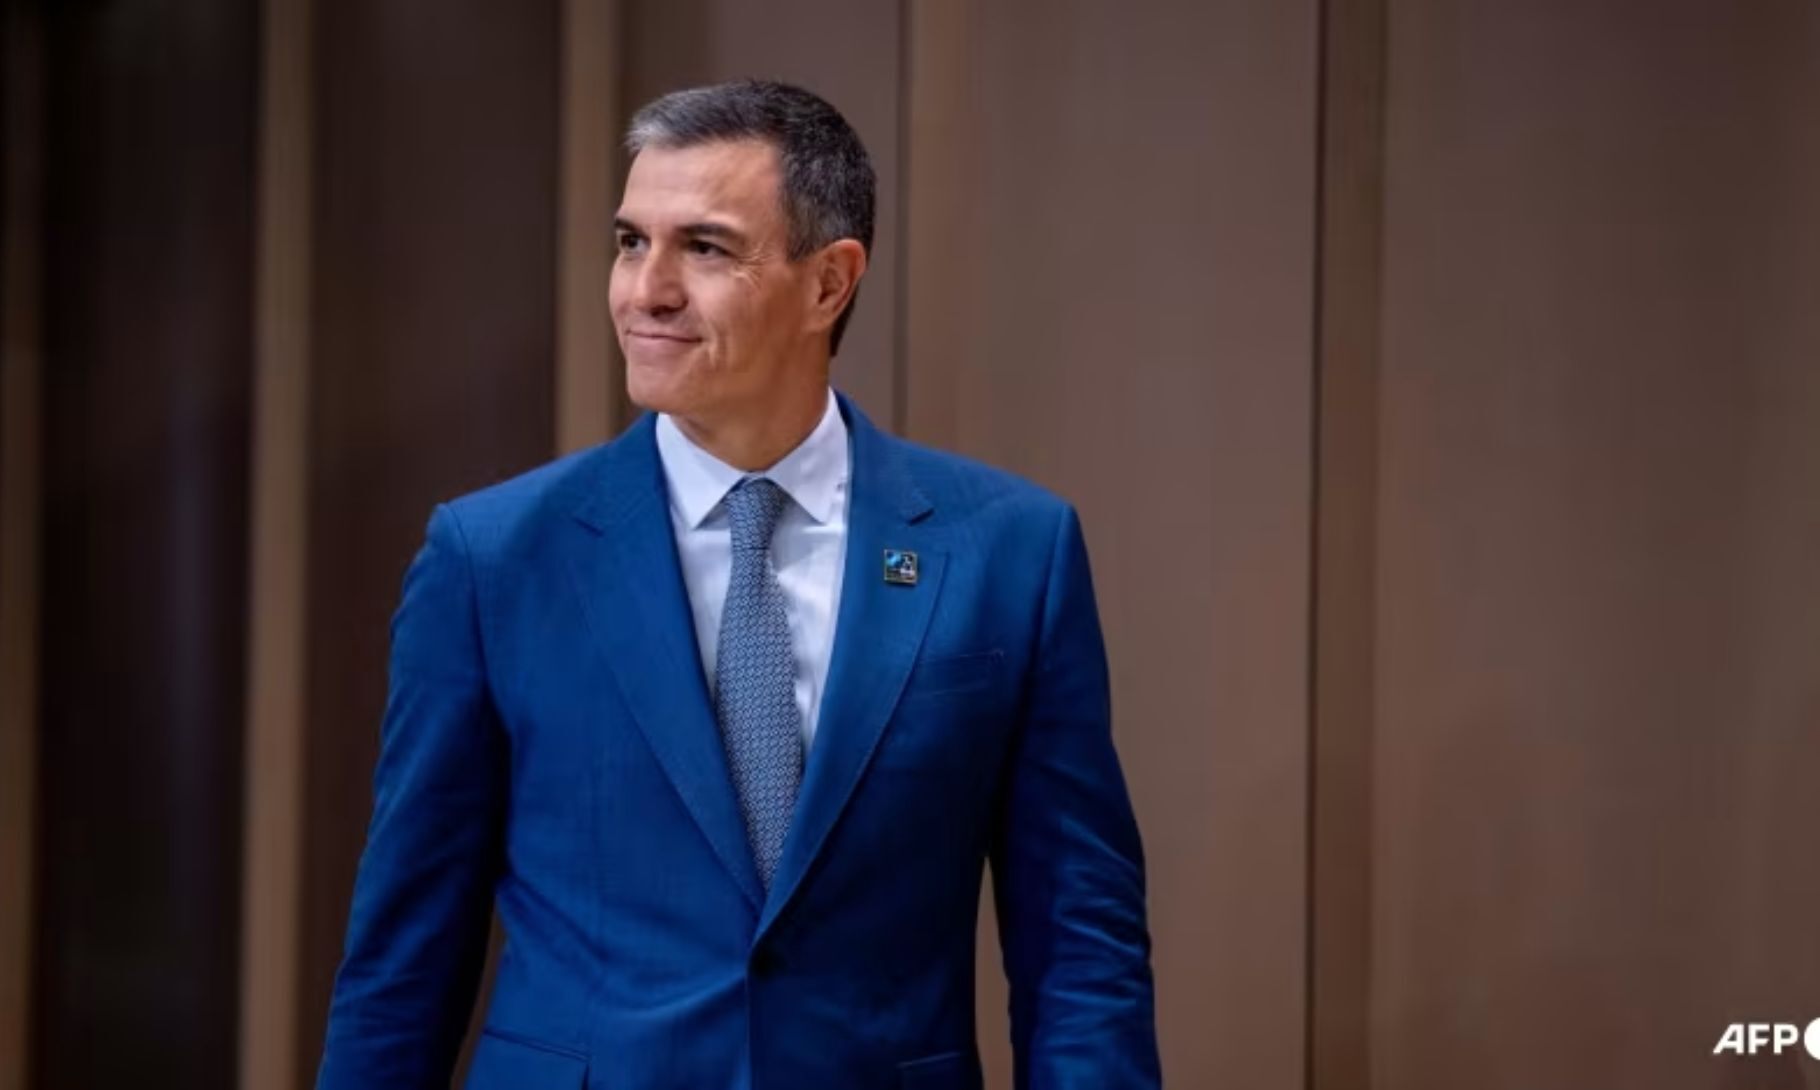 Spain PM Rejects “Double Standards” On Gaza At NATO Summit